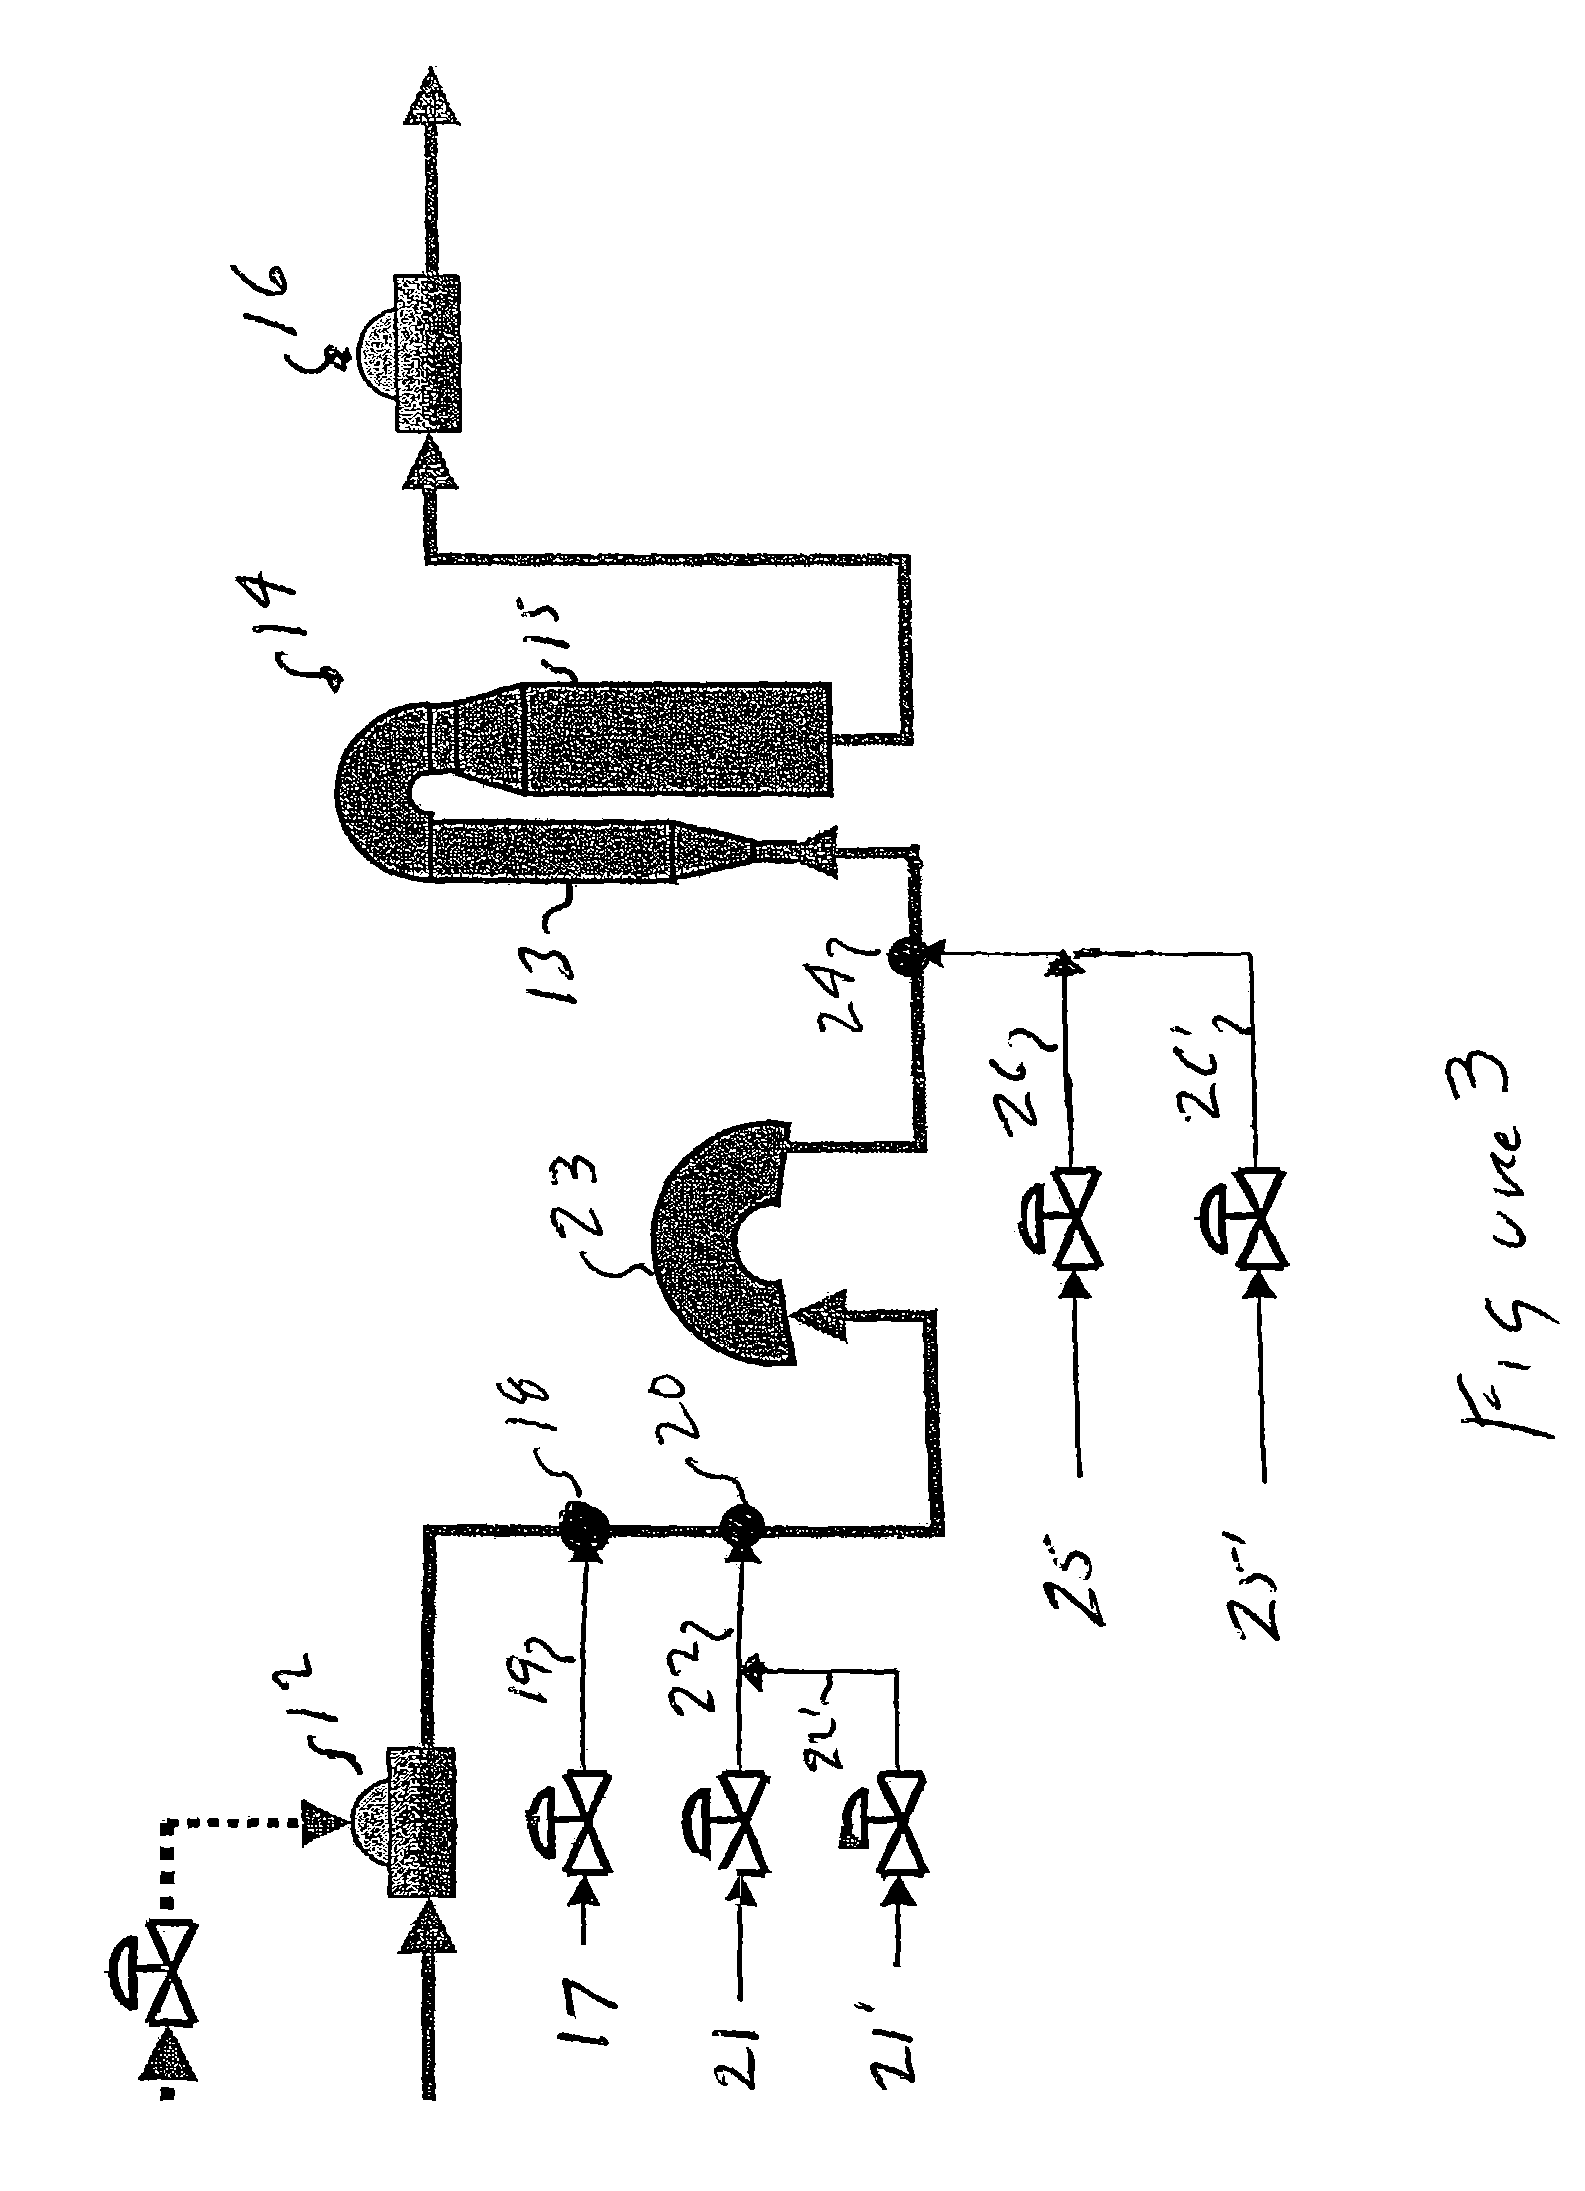 Apparatus for making carboxylated pulp fibers